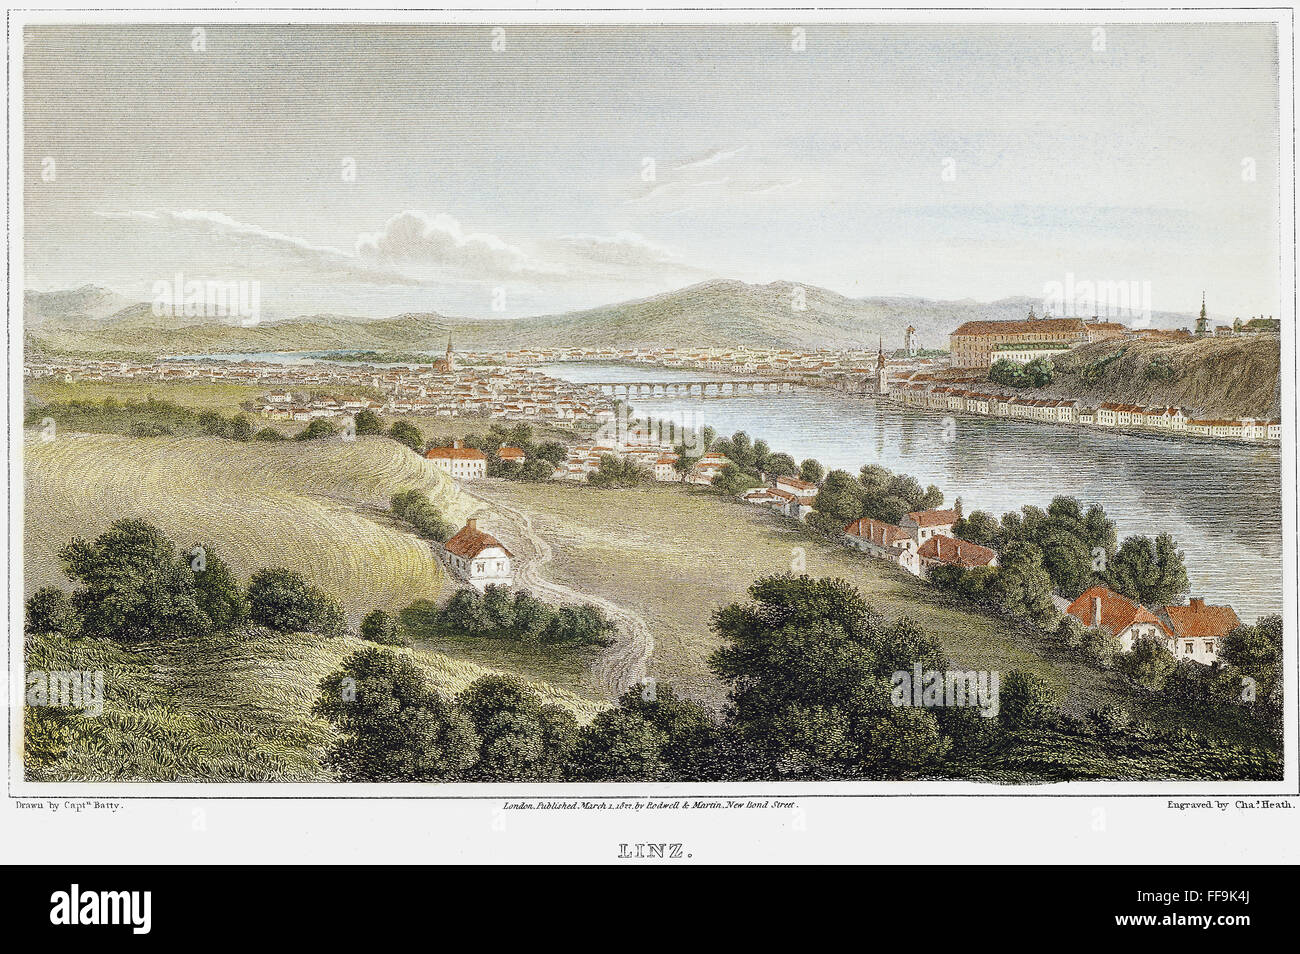 AUSTRIA: LINZ, 1822. /nA view of Linz, Austria, on the Danube River. Line engraving, English, 1822, after a drawing by Robert Batty. Stock Photo